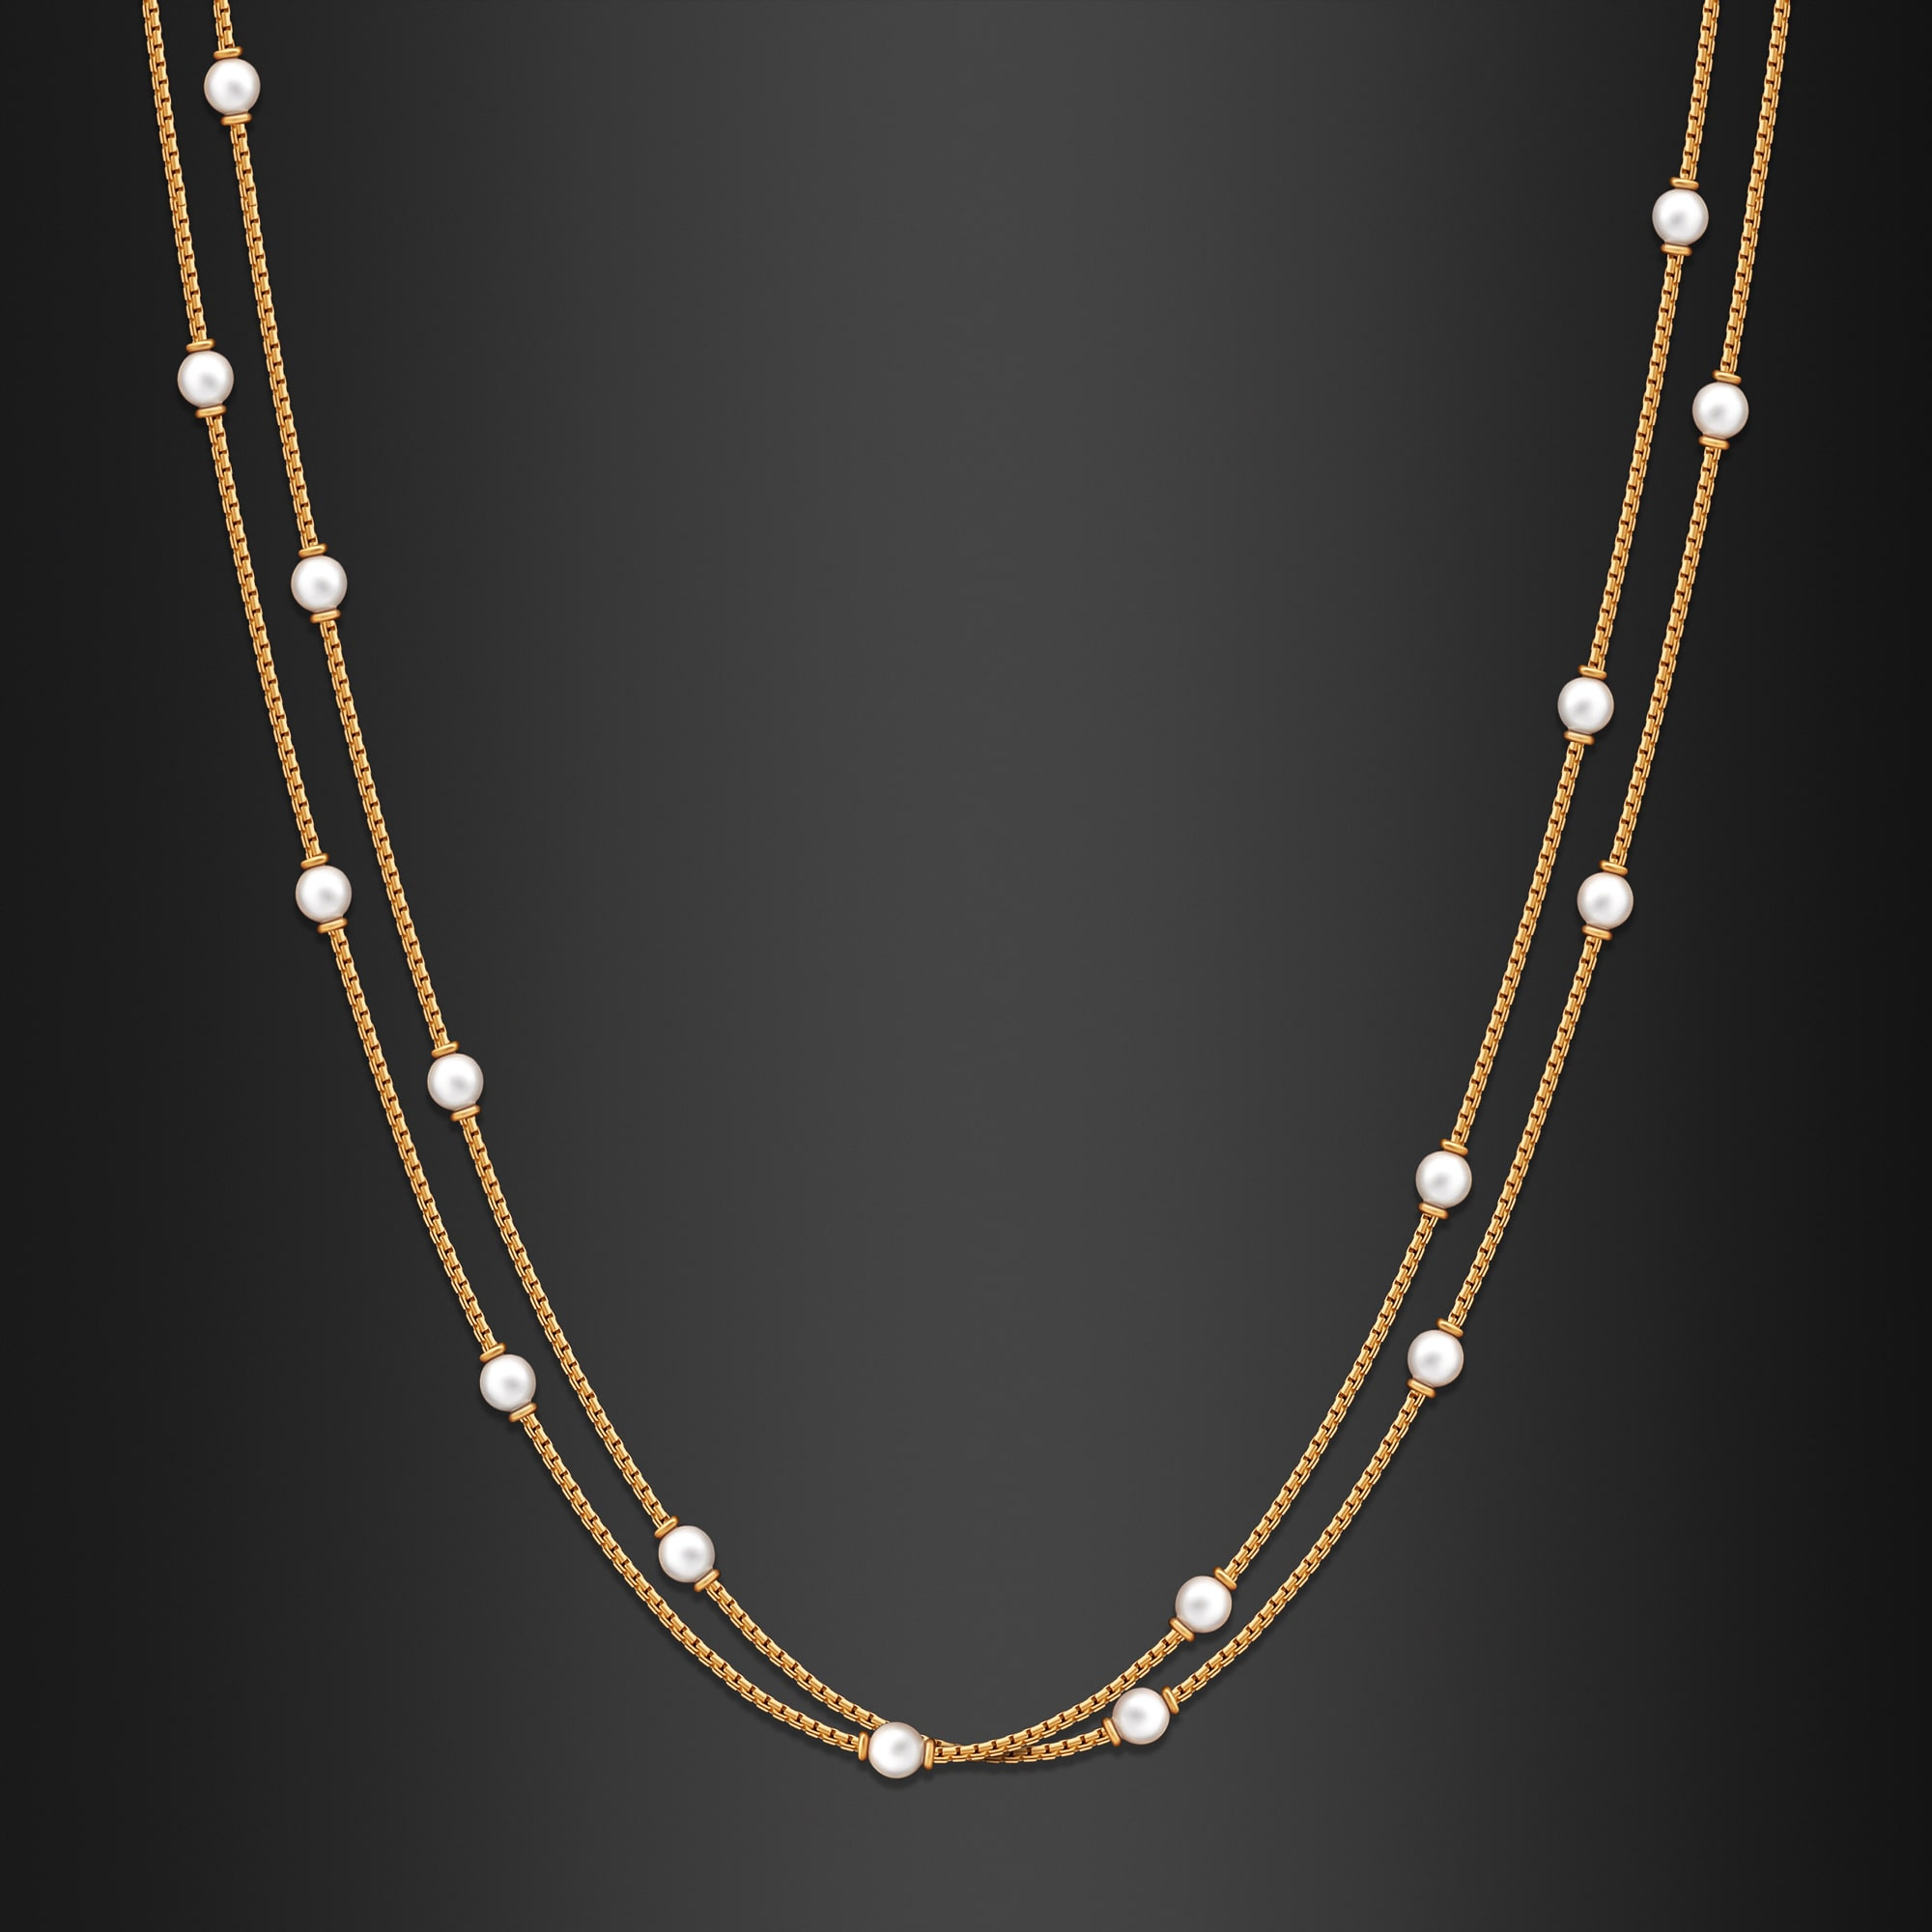 22K, 18K Gold Necklace for Women  Indian Chain Necklaces in CA, GA